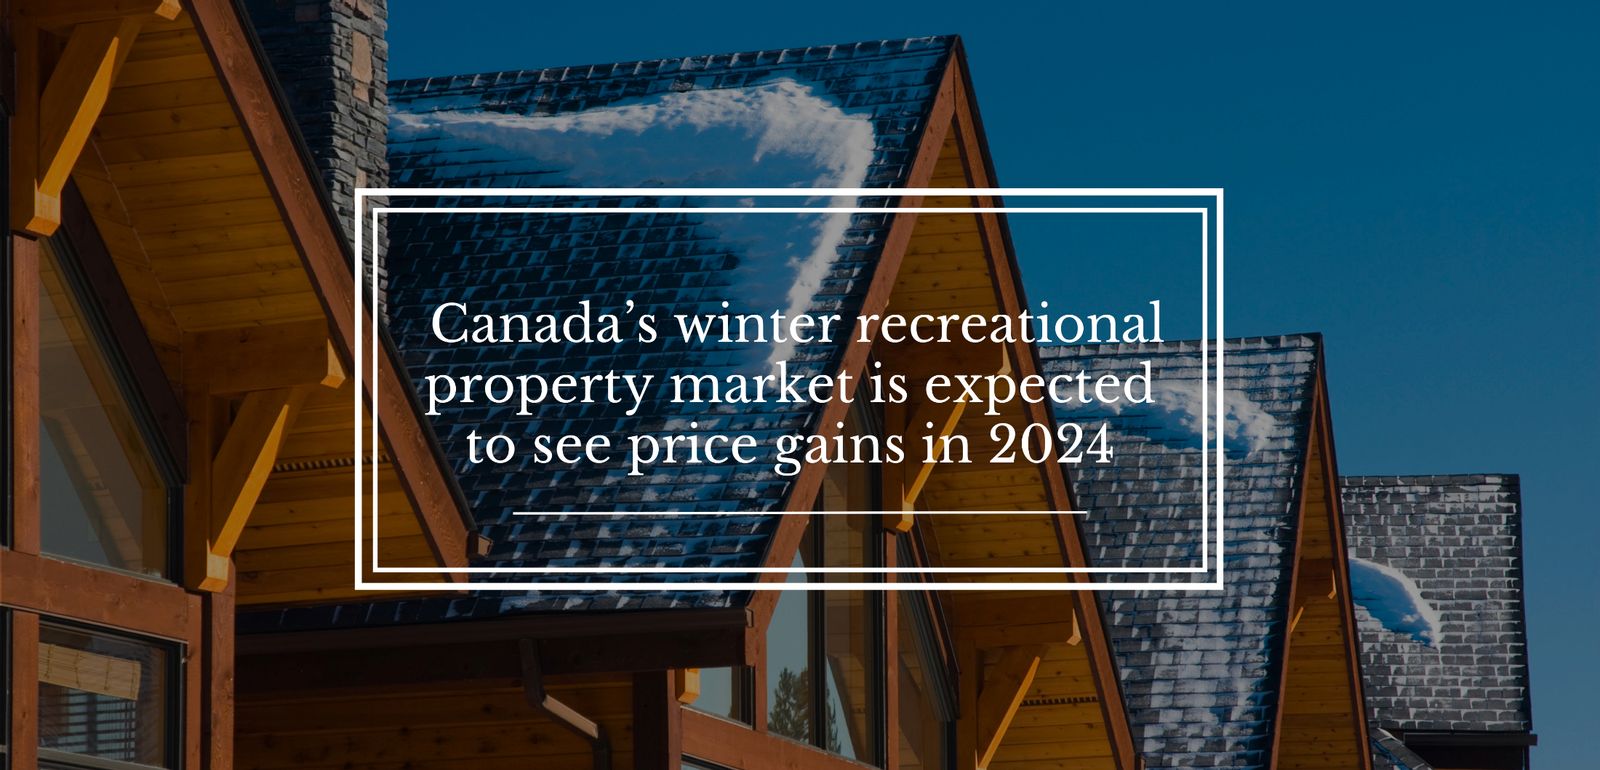 Despite softening activity, Canada’s winter recreational property market is expected to see price gains in 2024